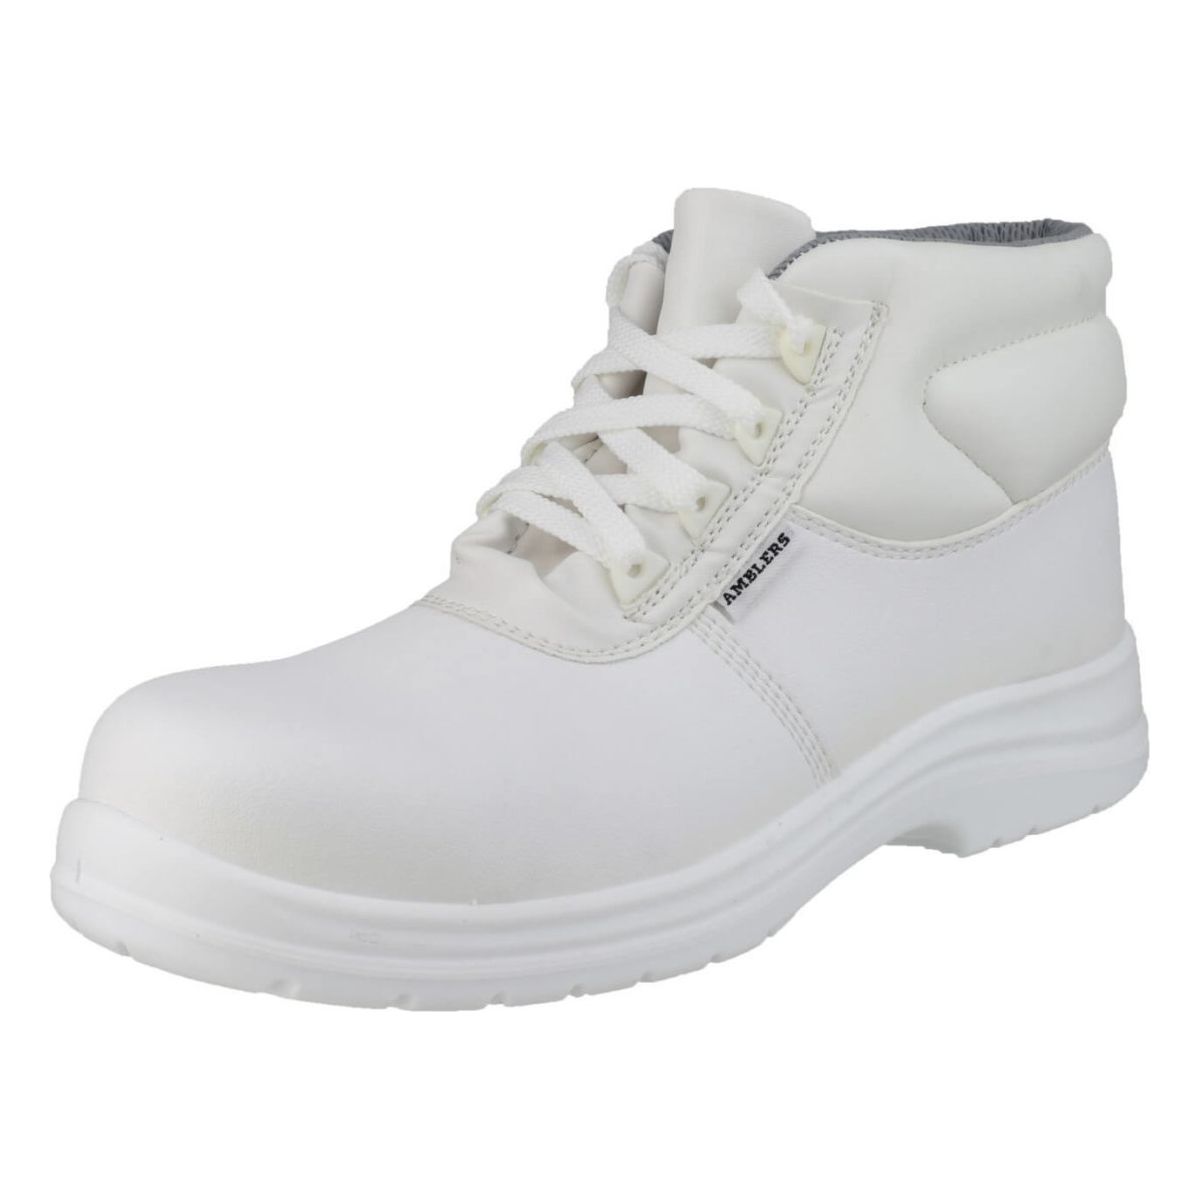 Amblers Fs513 Metal-Free Water-Resistant Safety Boots Mens - workweargurus.com